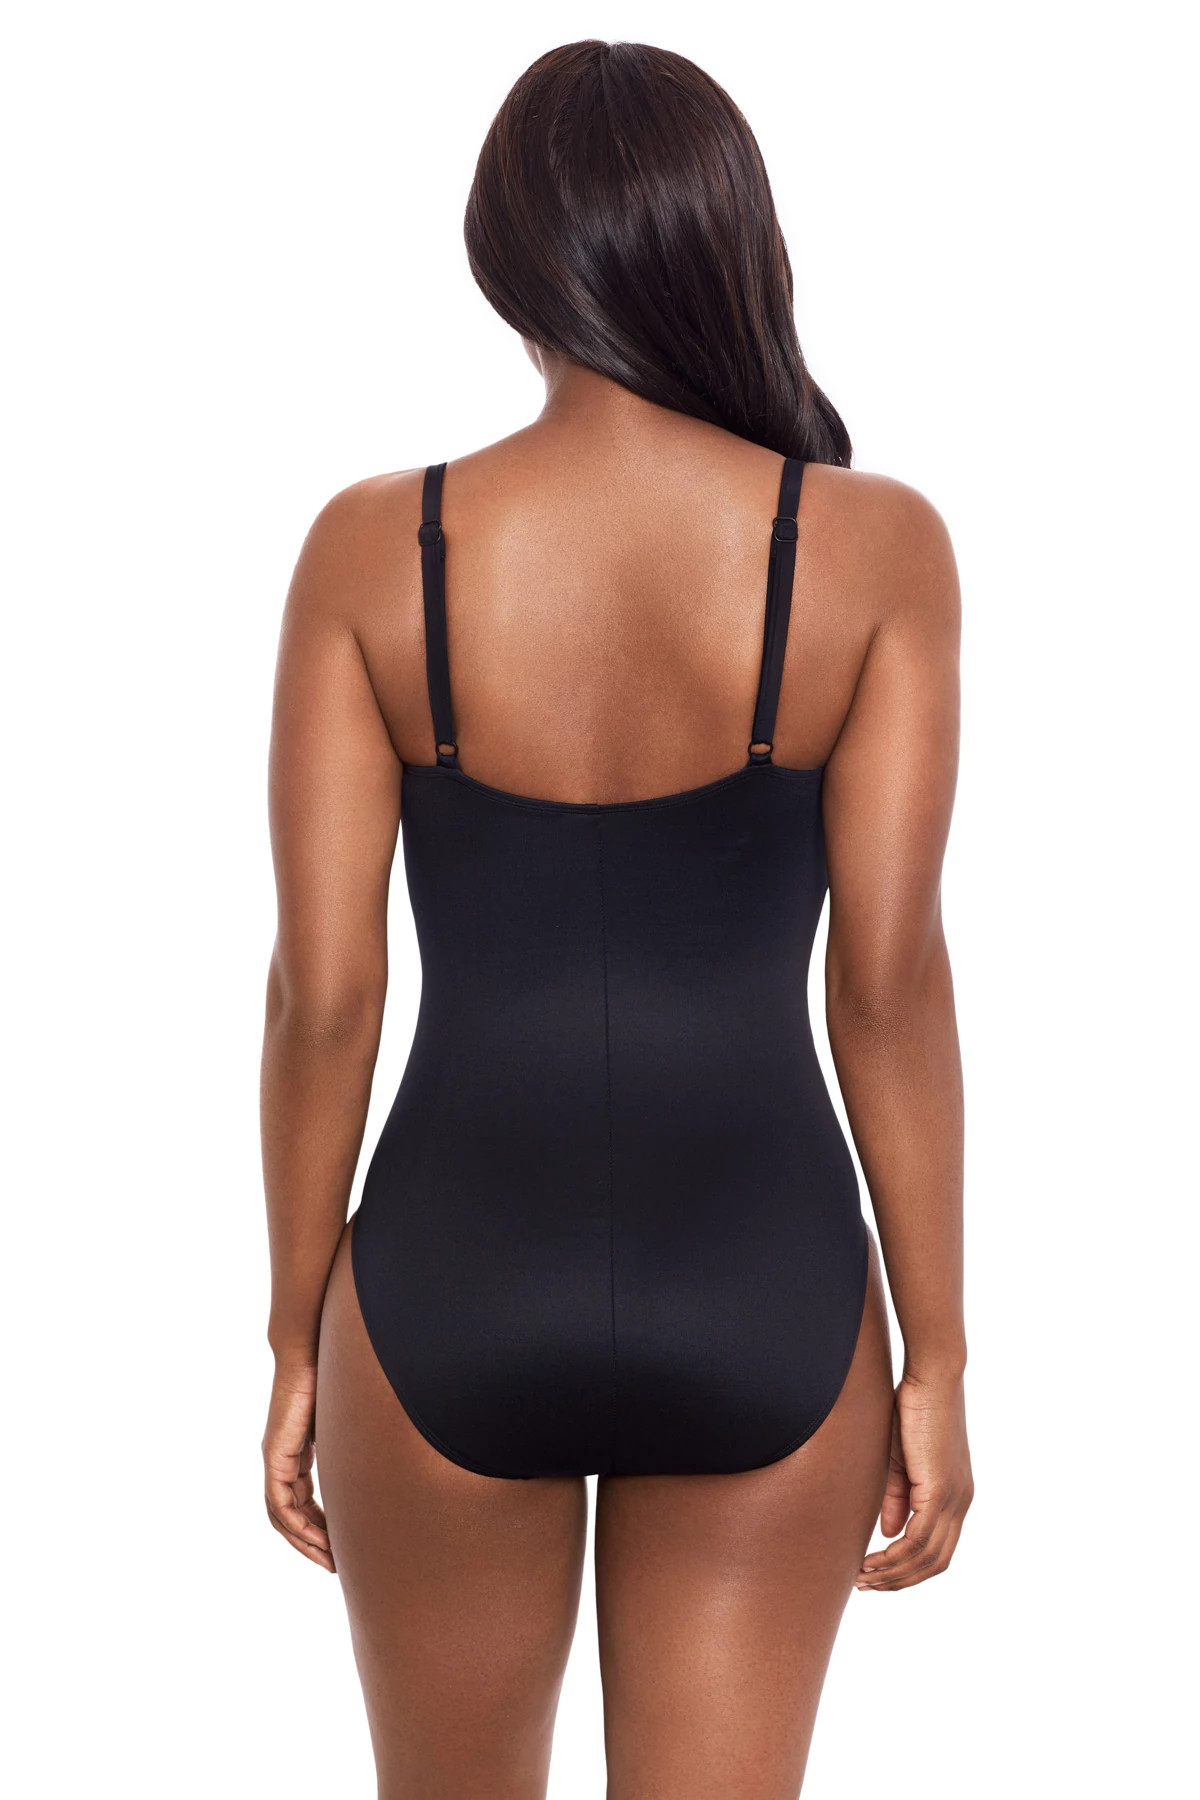 BRONZE Spectra Trifecta One Piece Swimsuit image number 2